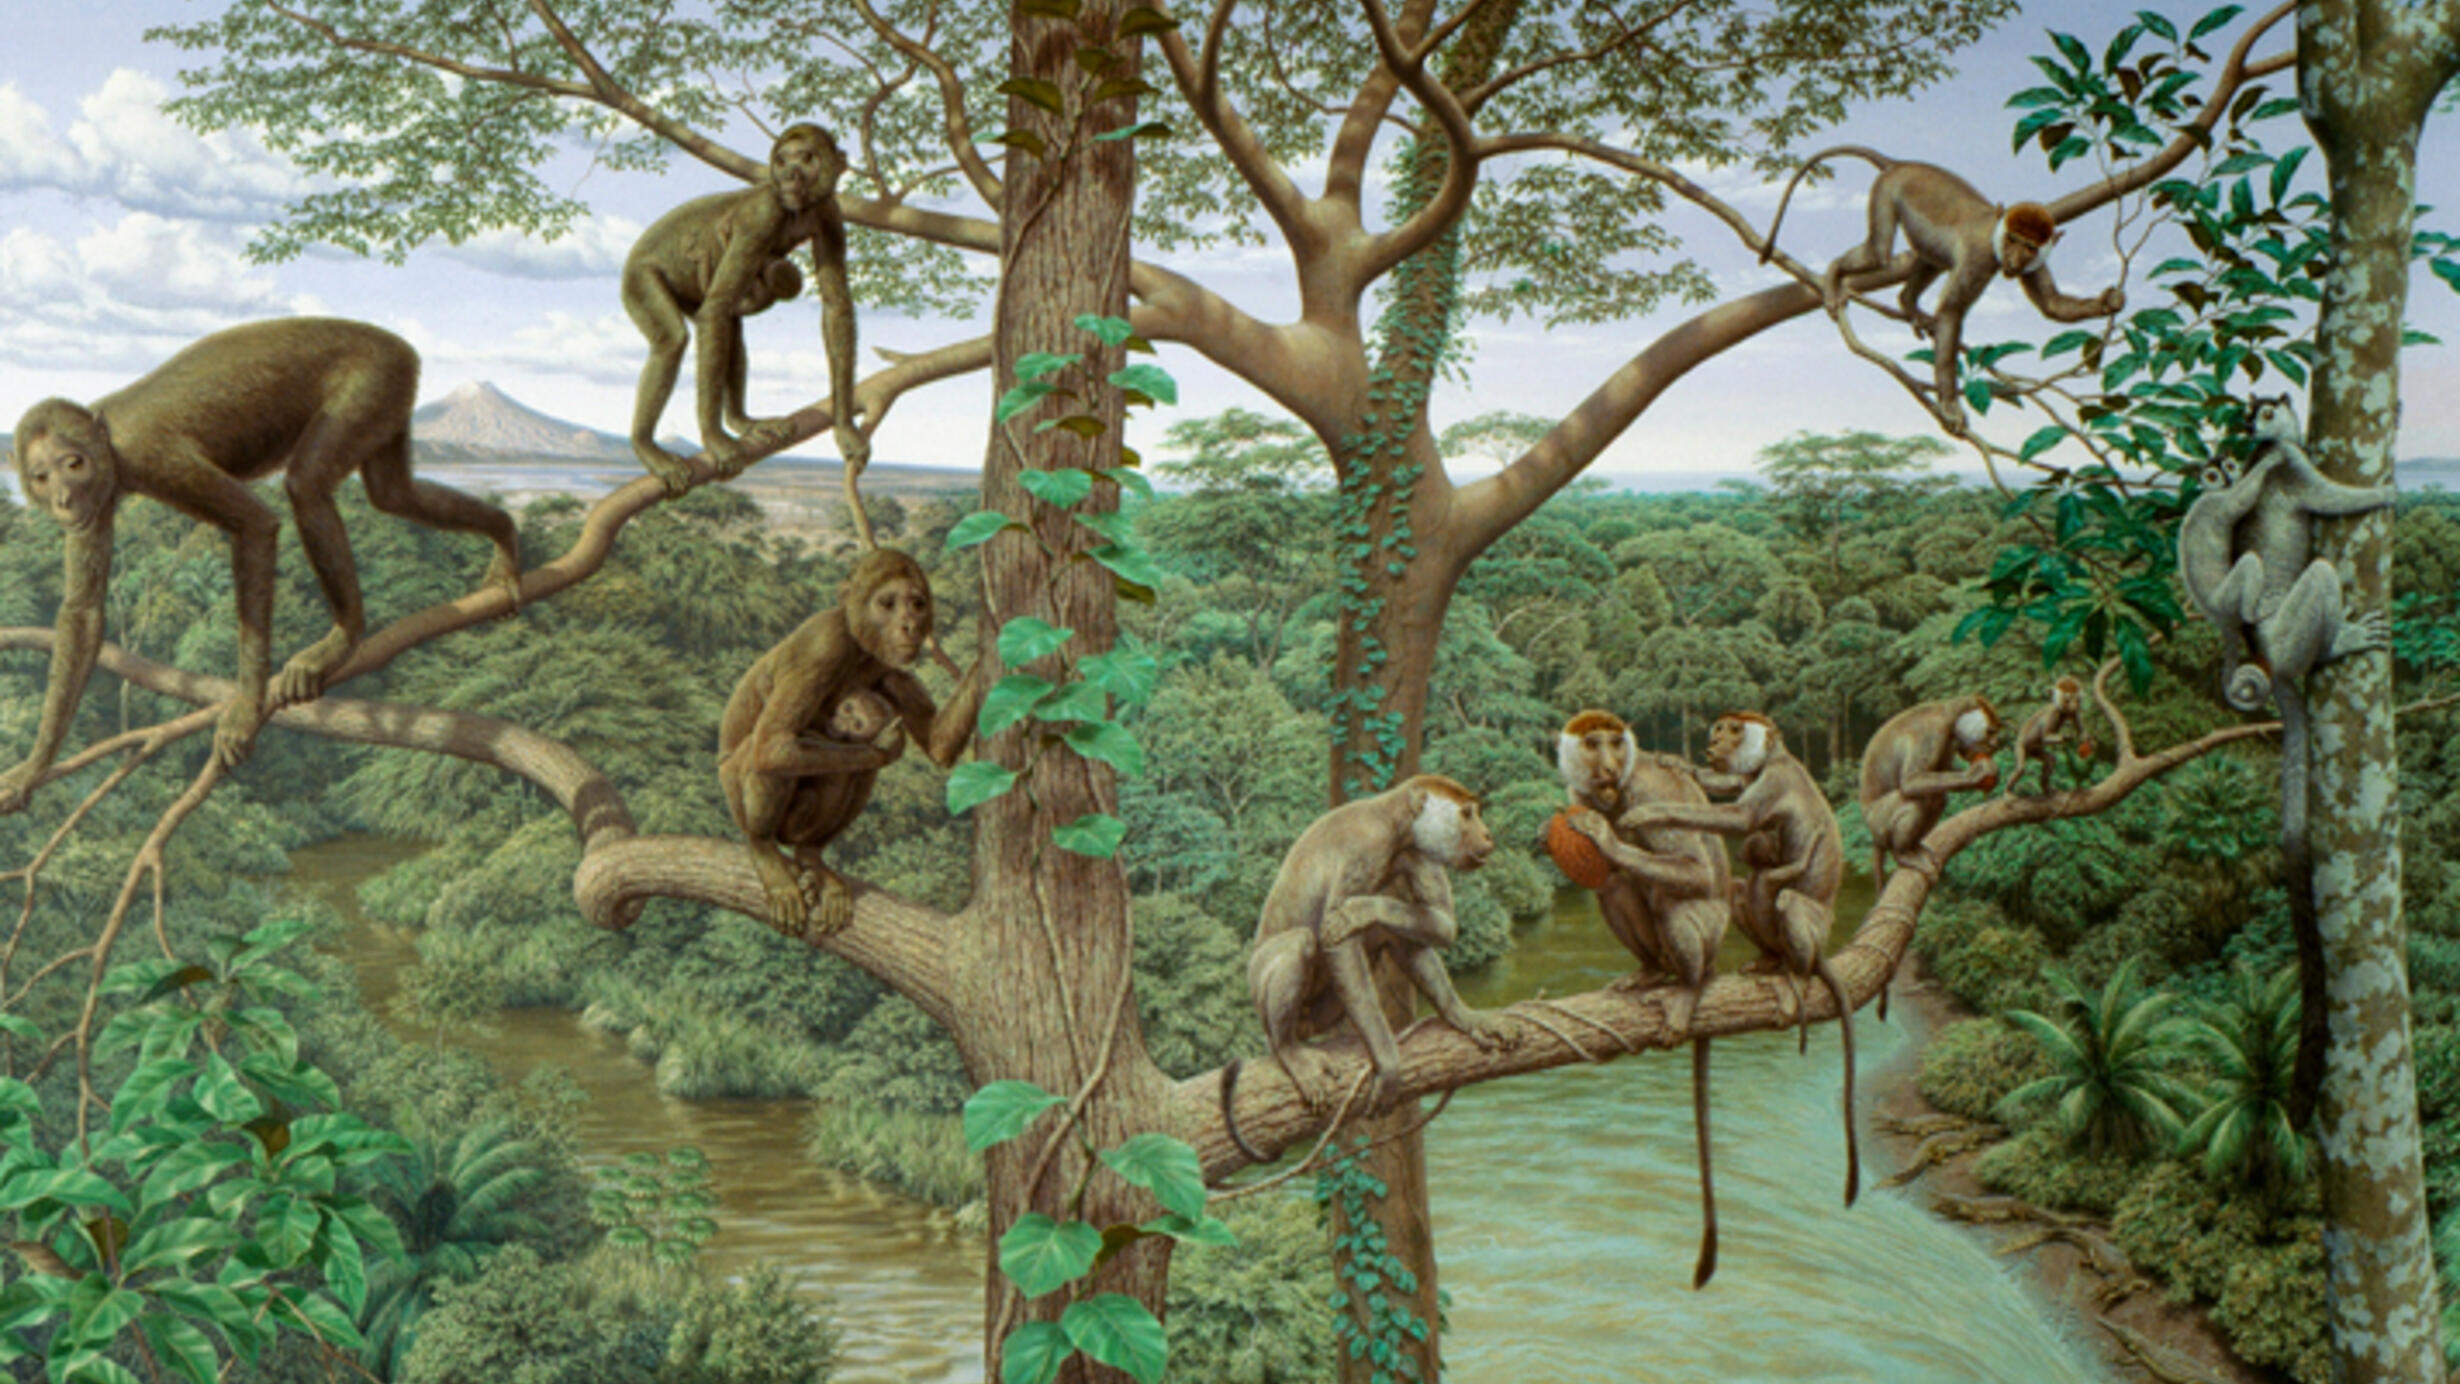 A painting of several species of primates, some with long tails, some with none, some holding young, on the branches of tall trees above a river.